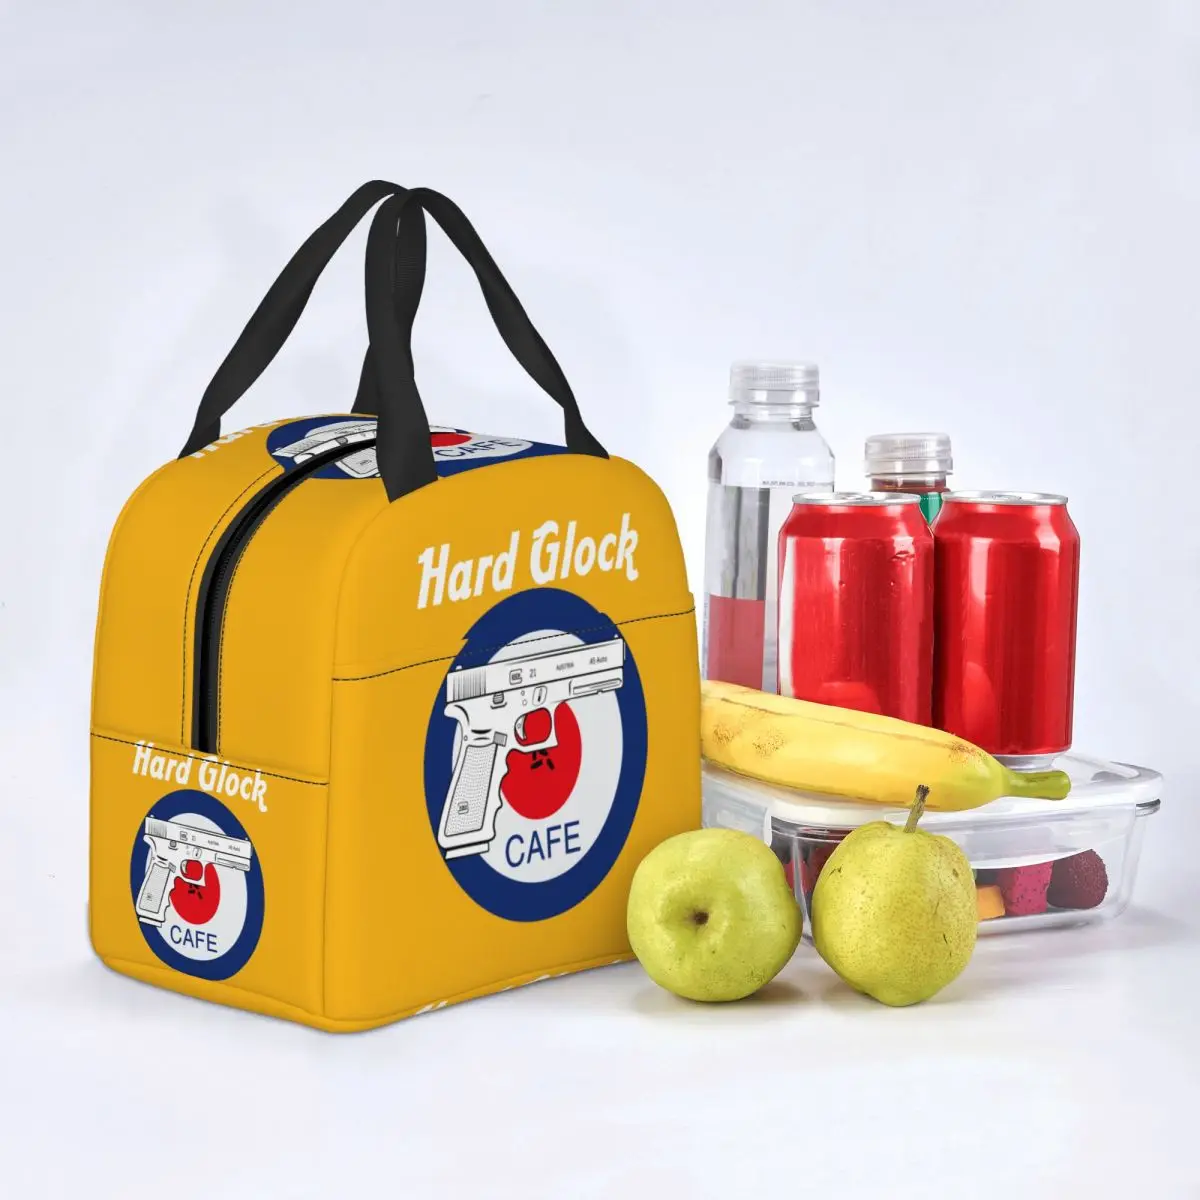 Vintage Hard Glock Cafe Lunch Bag for Camping Travel Waterproof Thermal Cooler Insulated Lunch Box Women Kids Tote Container images - 6